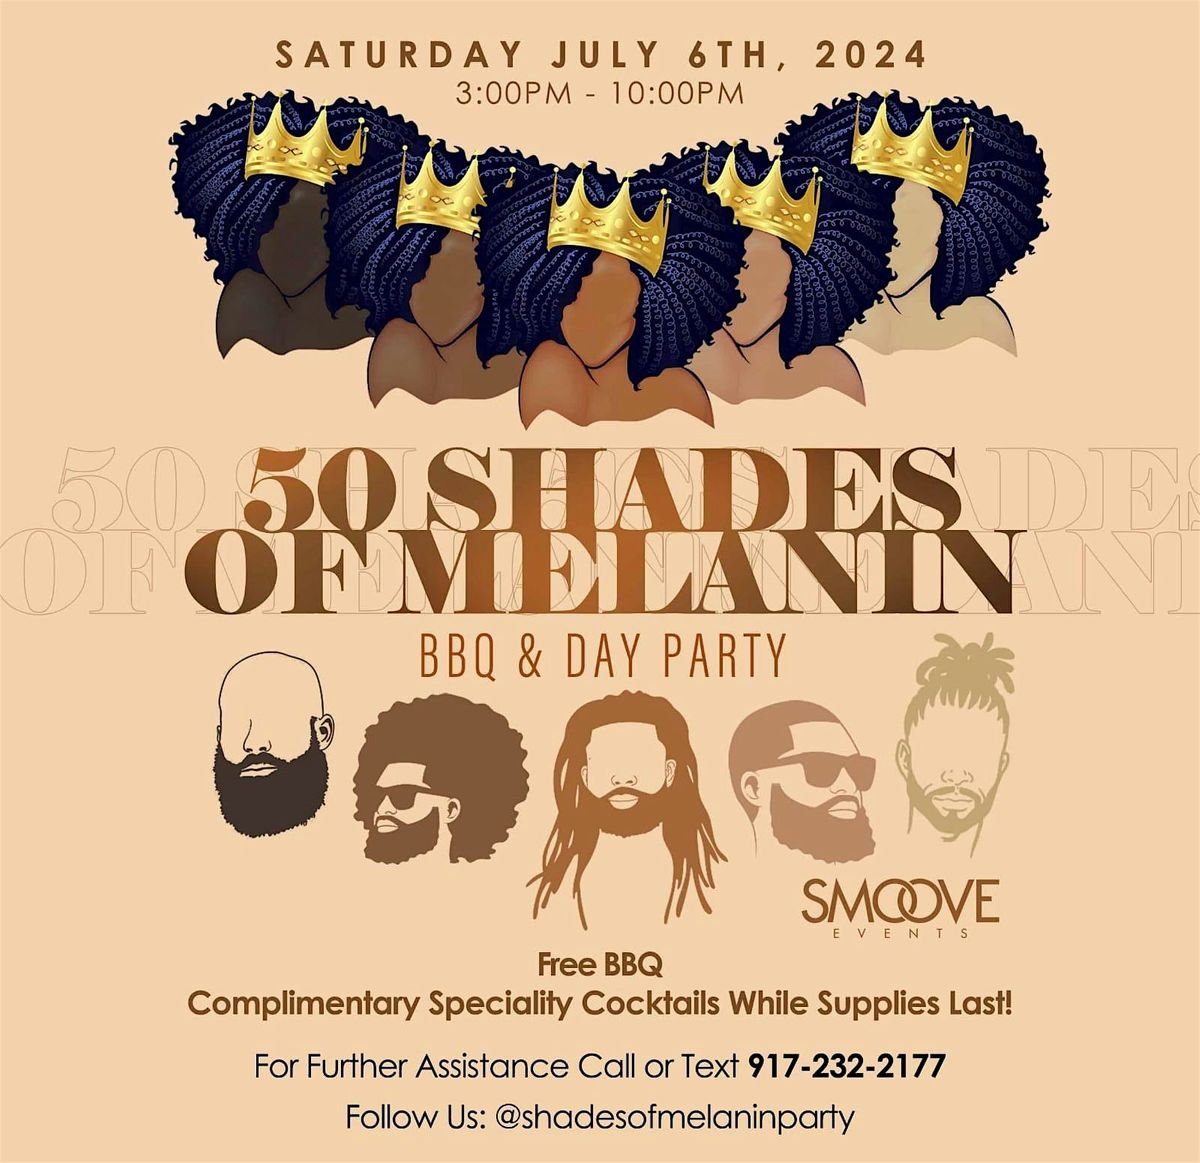 Shades Of Melanin BBQ And Day Party: Essence Fest Edition